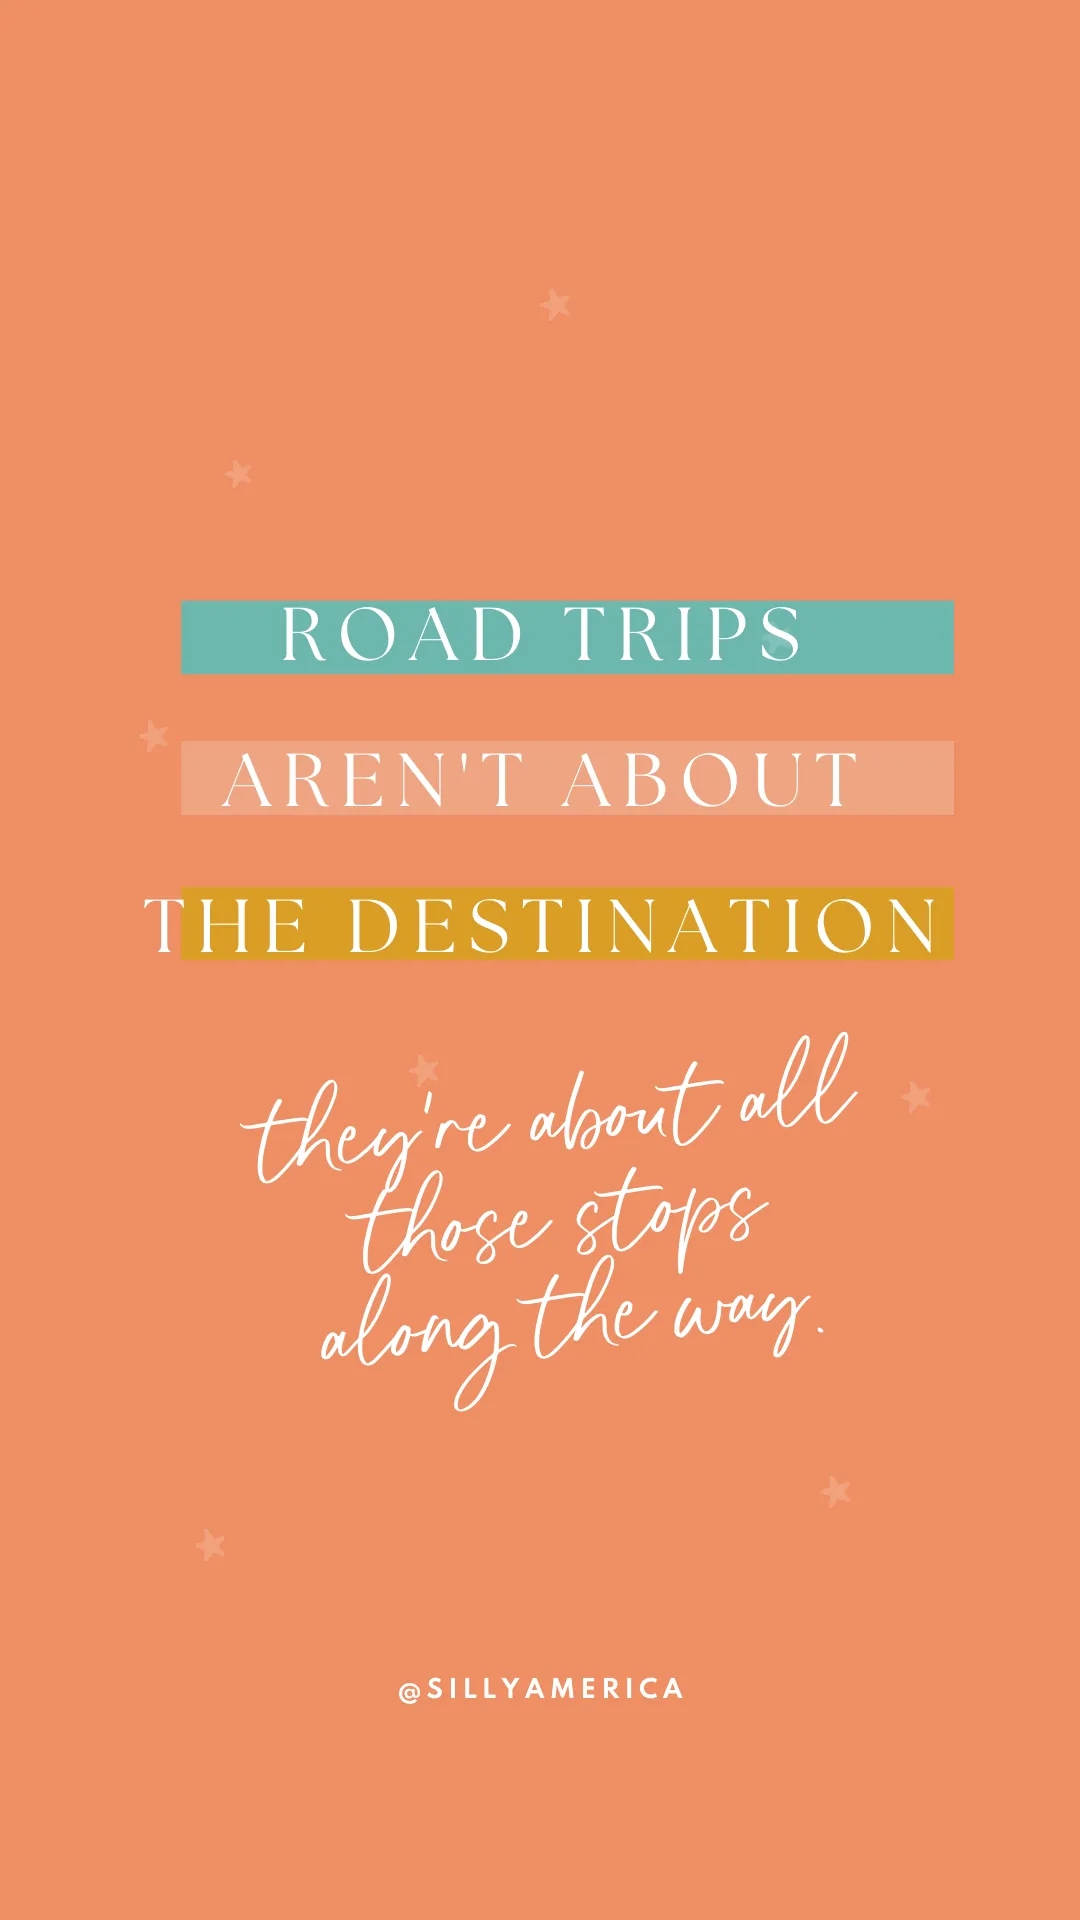 Road trips aren't about the destination, they're about all those stops along the way. - Road Trip Captions for Instagram